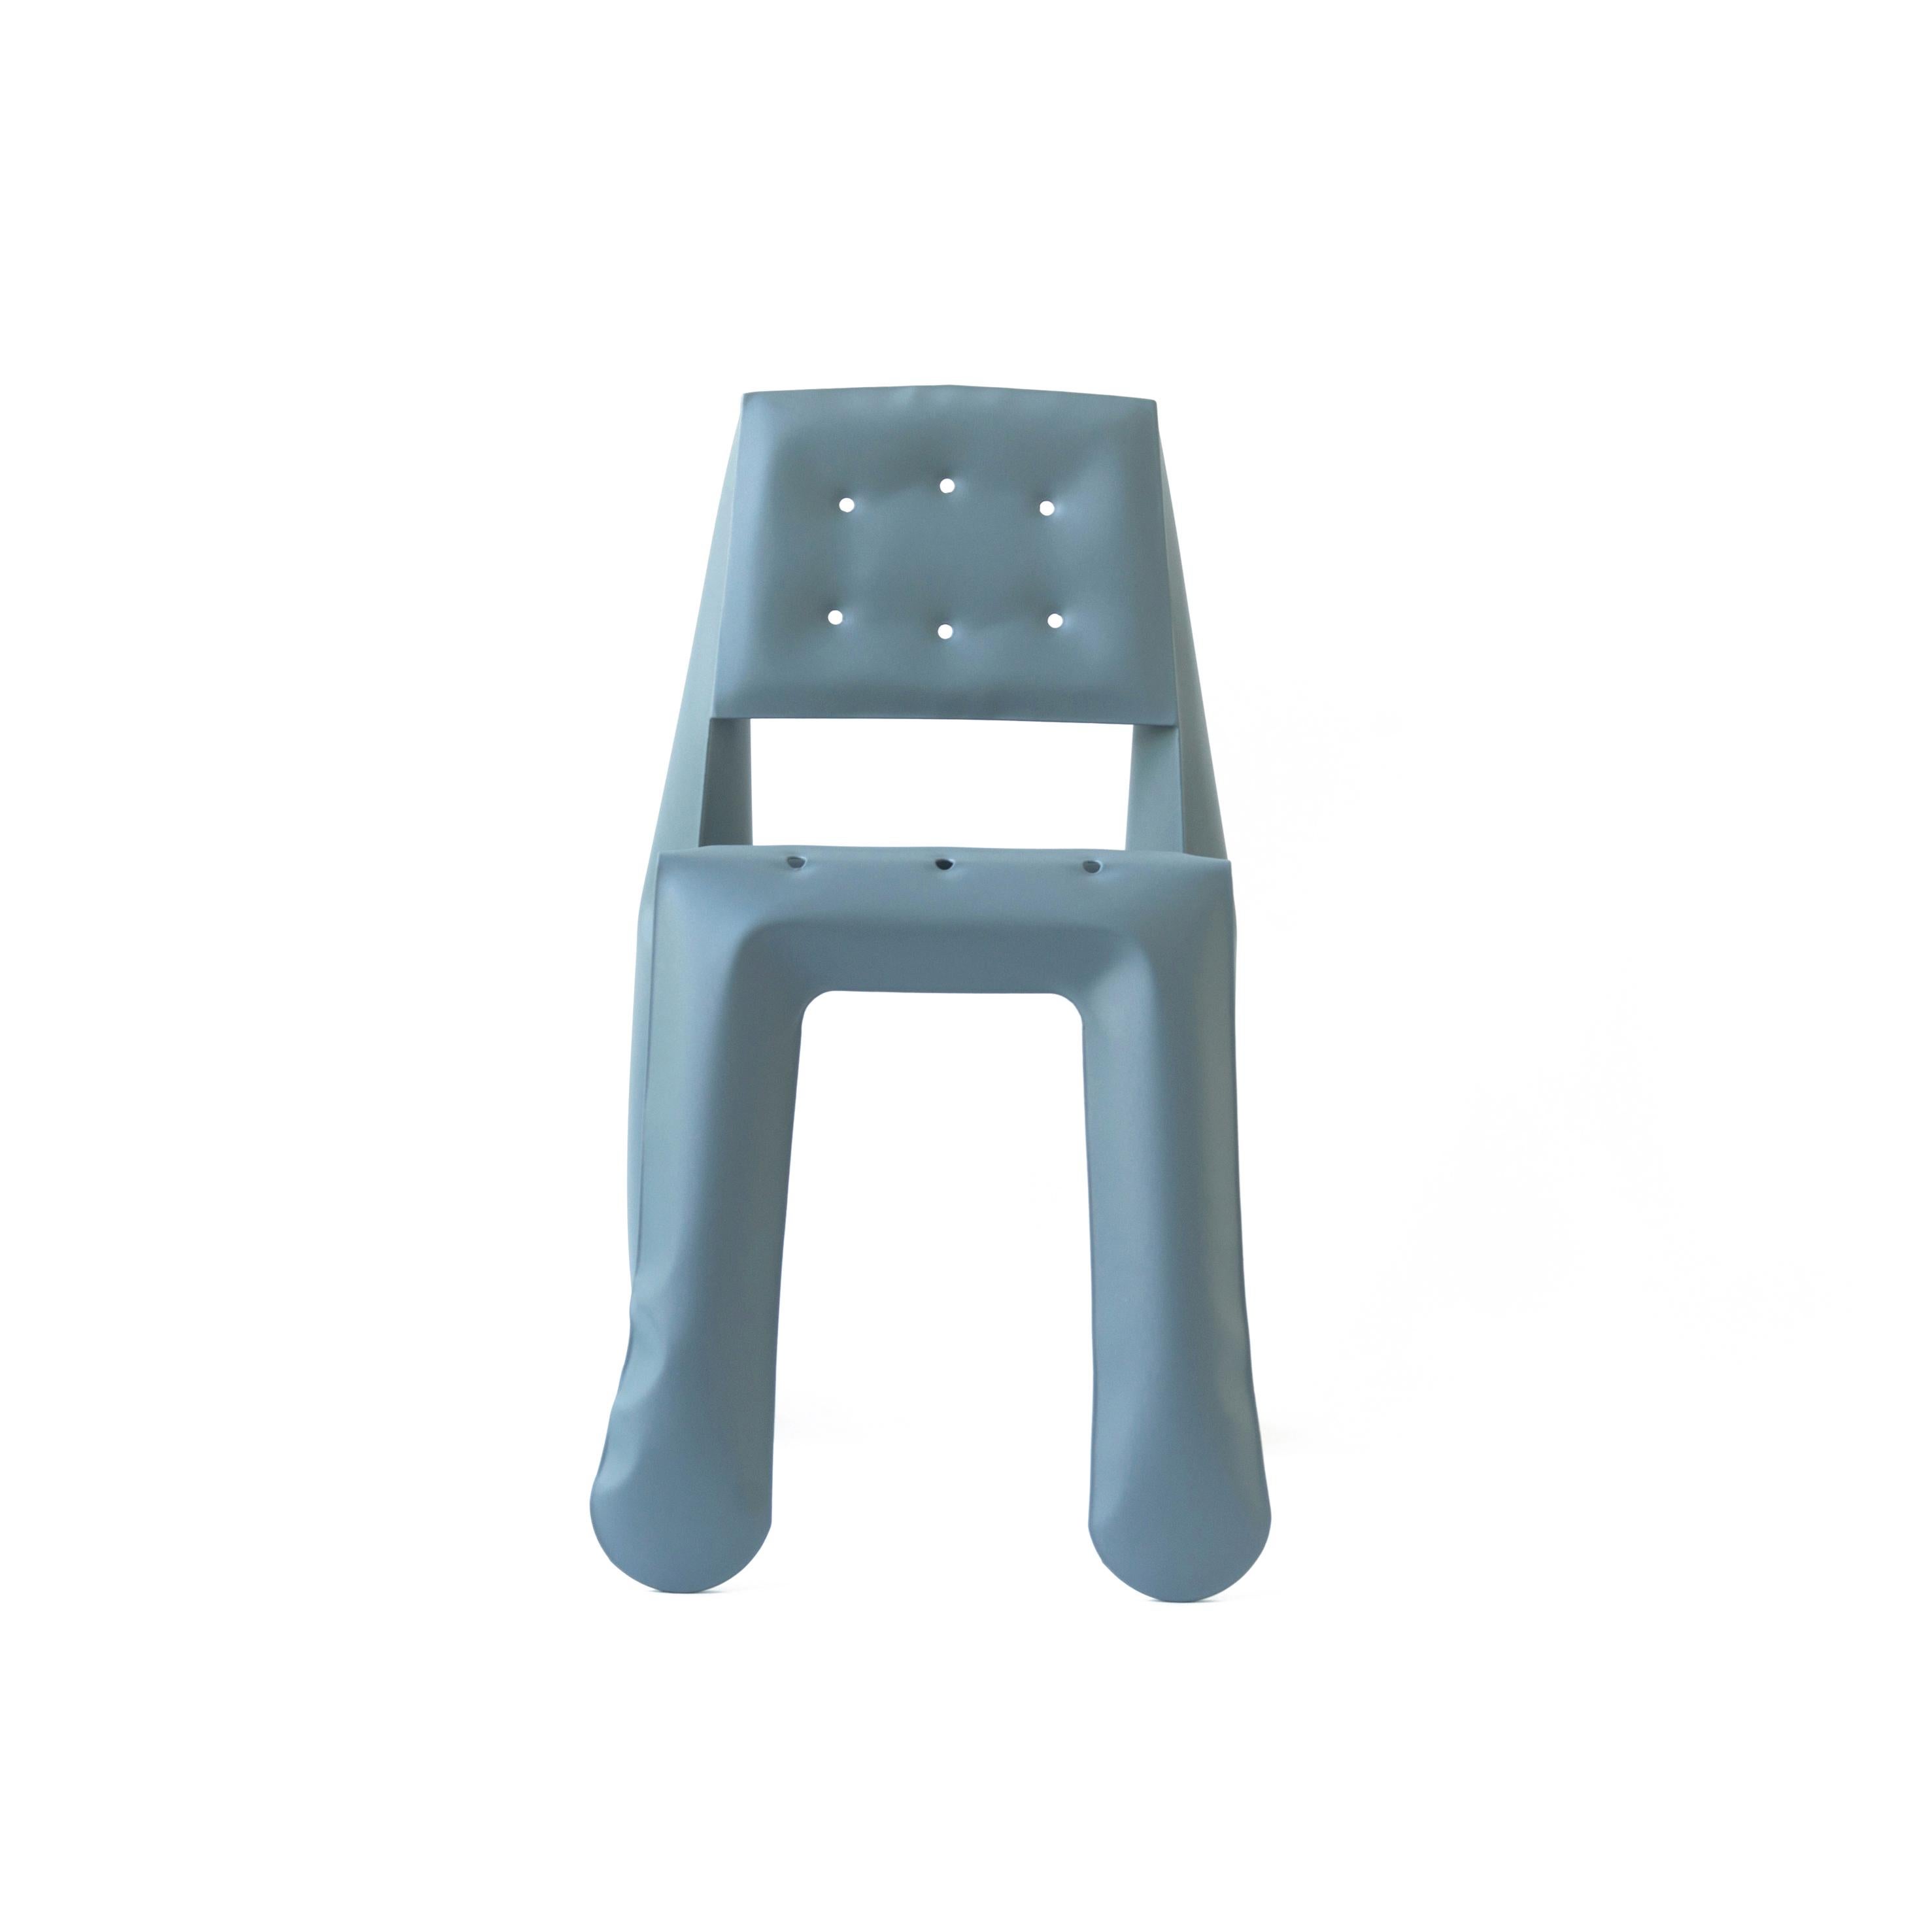 Blue Grey Aluminum Chippensteel 0.5 Sculptural Chair by Zieta
Dimensions: D 58 x W 46 x H 80 cm 
Material: Aluminum. 
Finish: Powder-coated. Matt finish. 
Available in colors: White matt, beige, black, blue-gray, graphite, moss-gray, and,